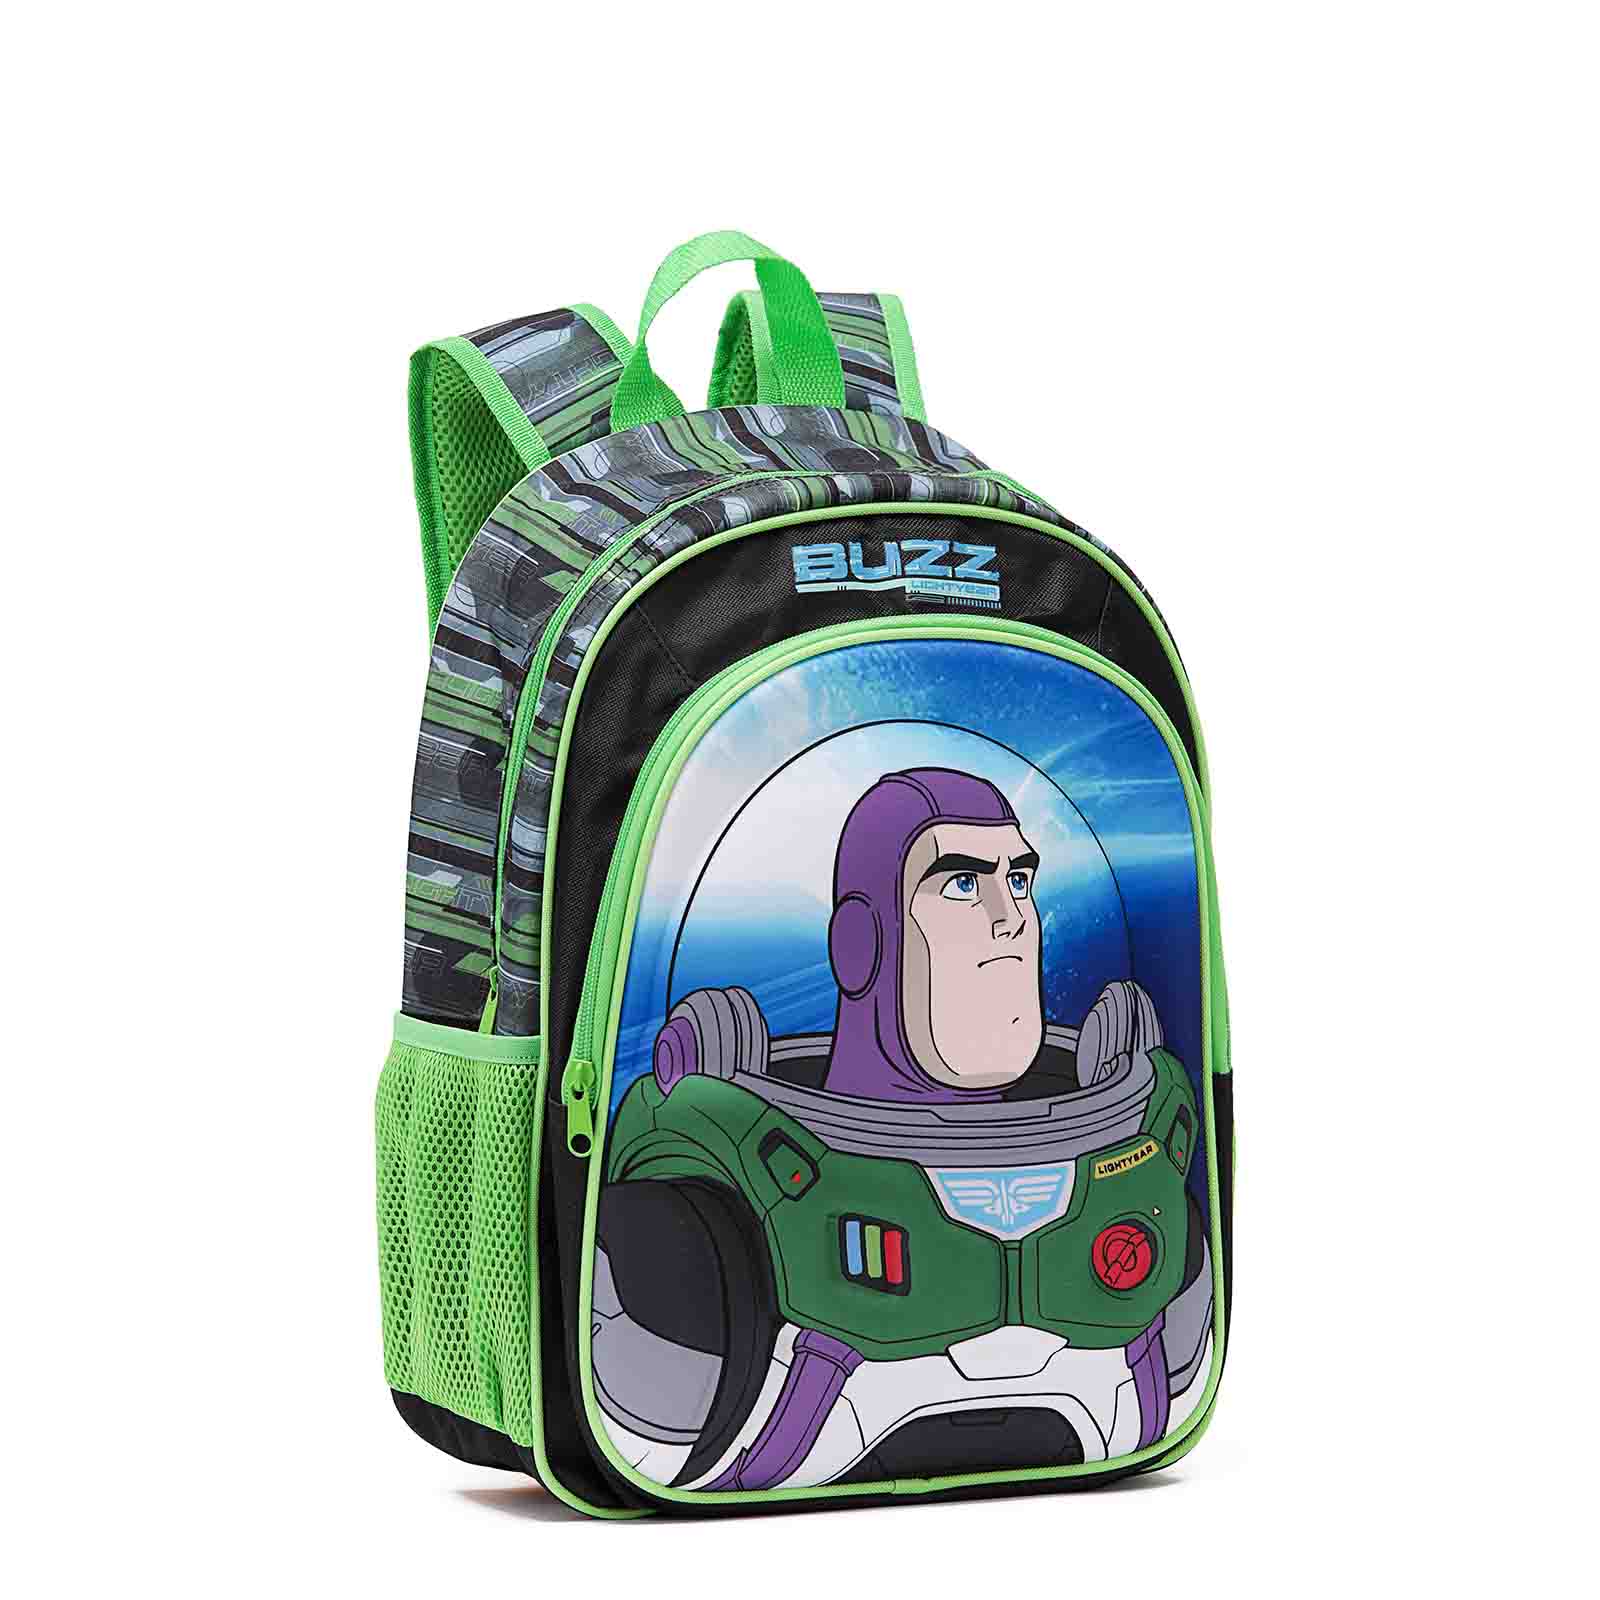 Disney-Buzz-15inch-Backpack-Front